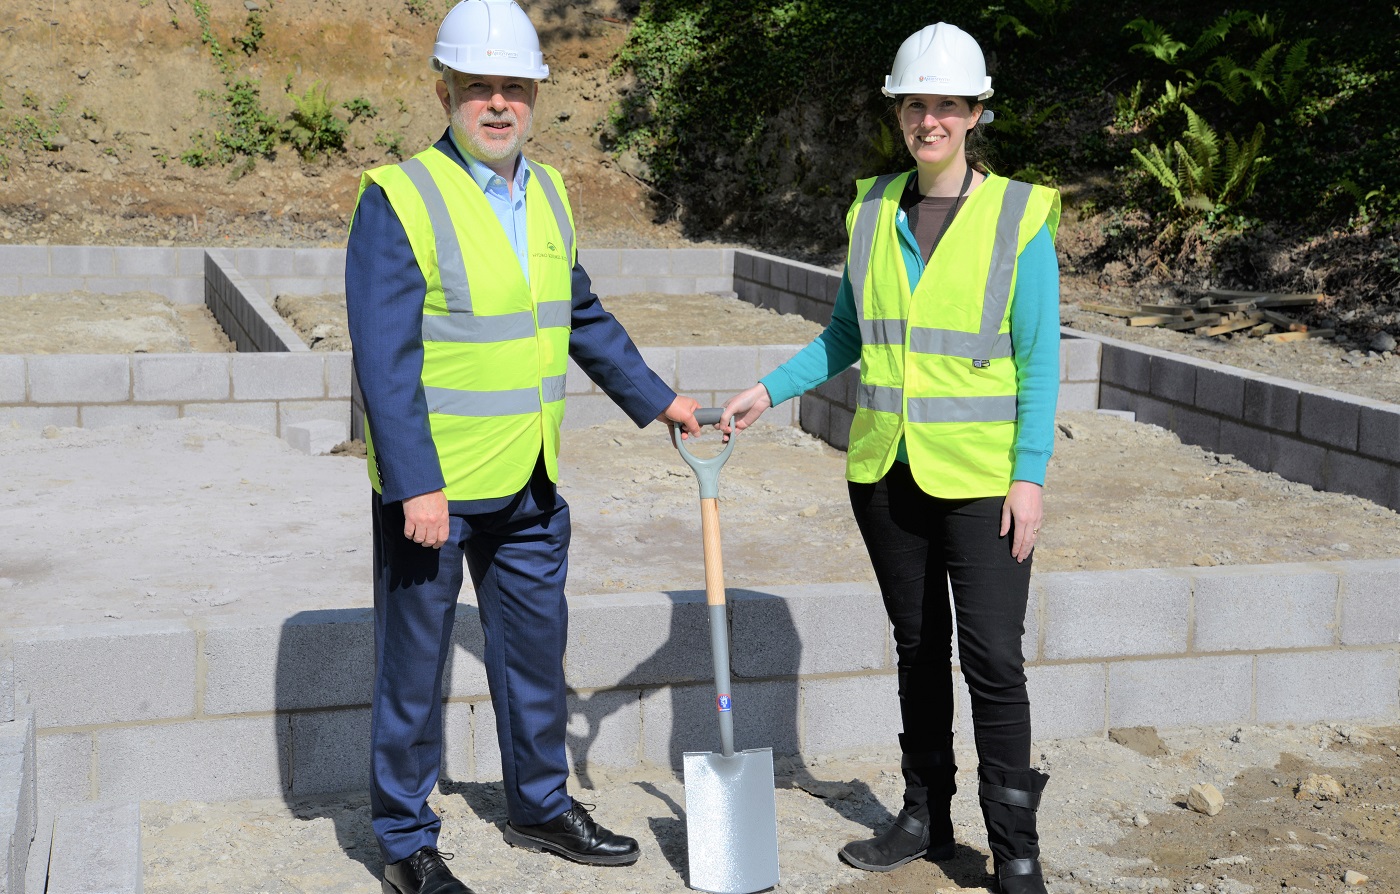 Professor Colin McInnes and Dr Patricia Shaw at the smart home construction site